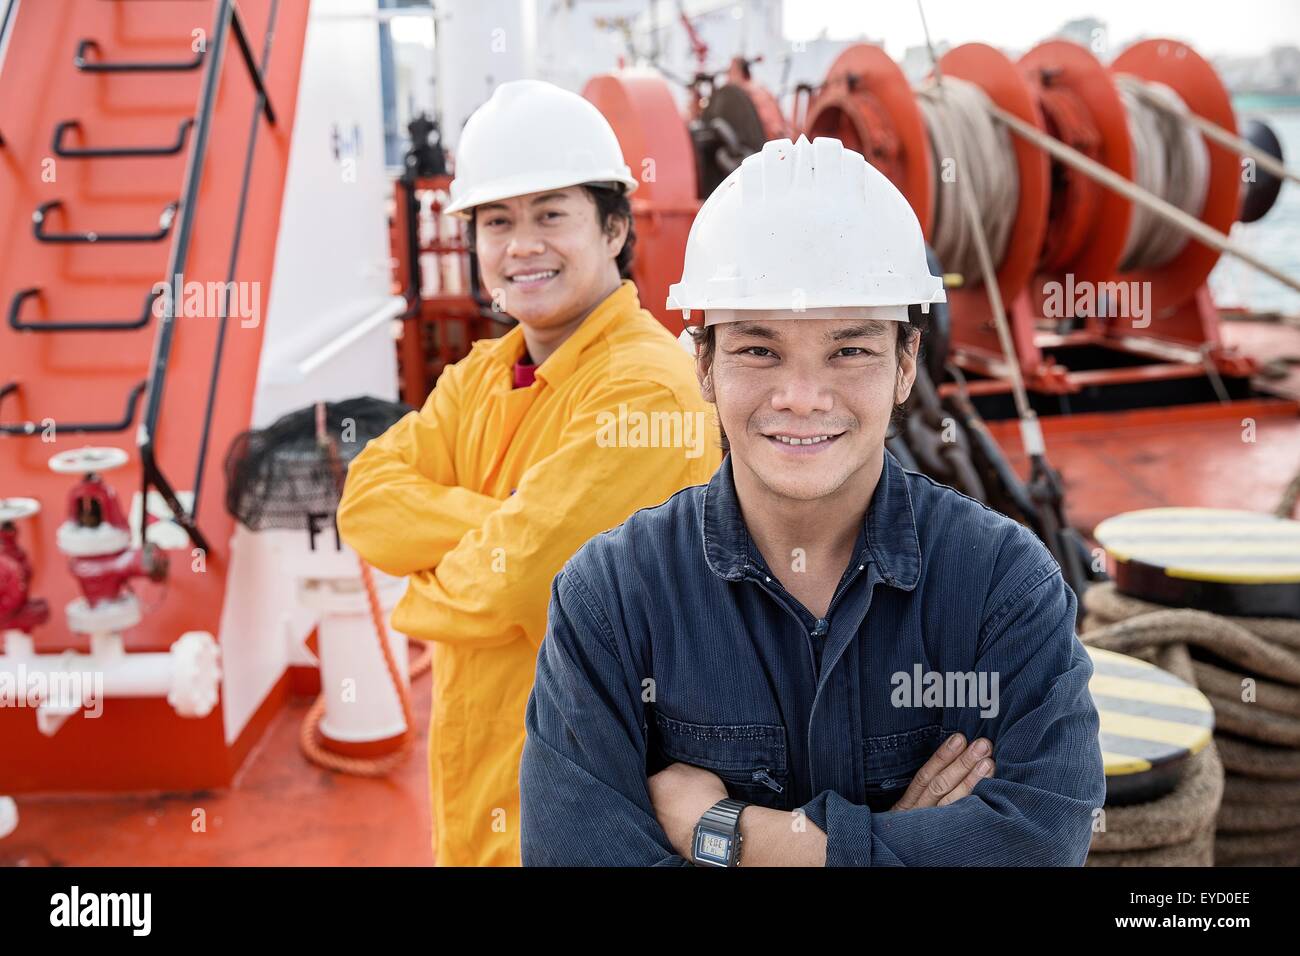 Portrait of workers on oil tanker Stock Photo